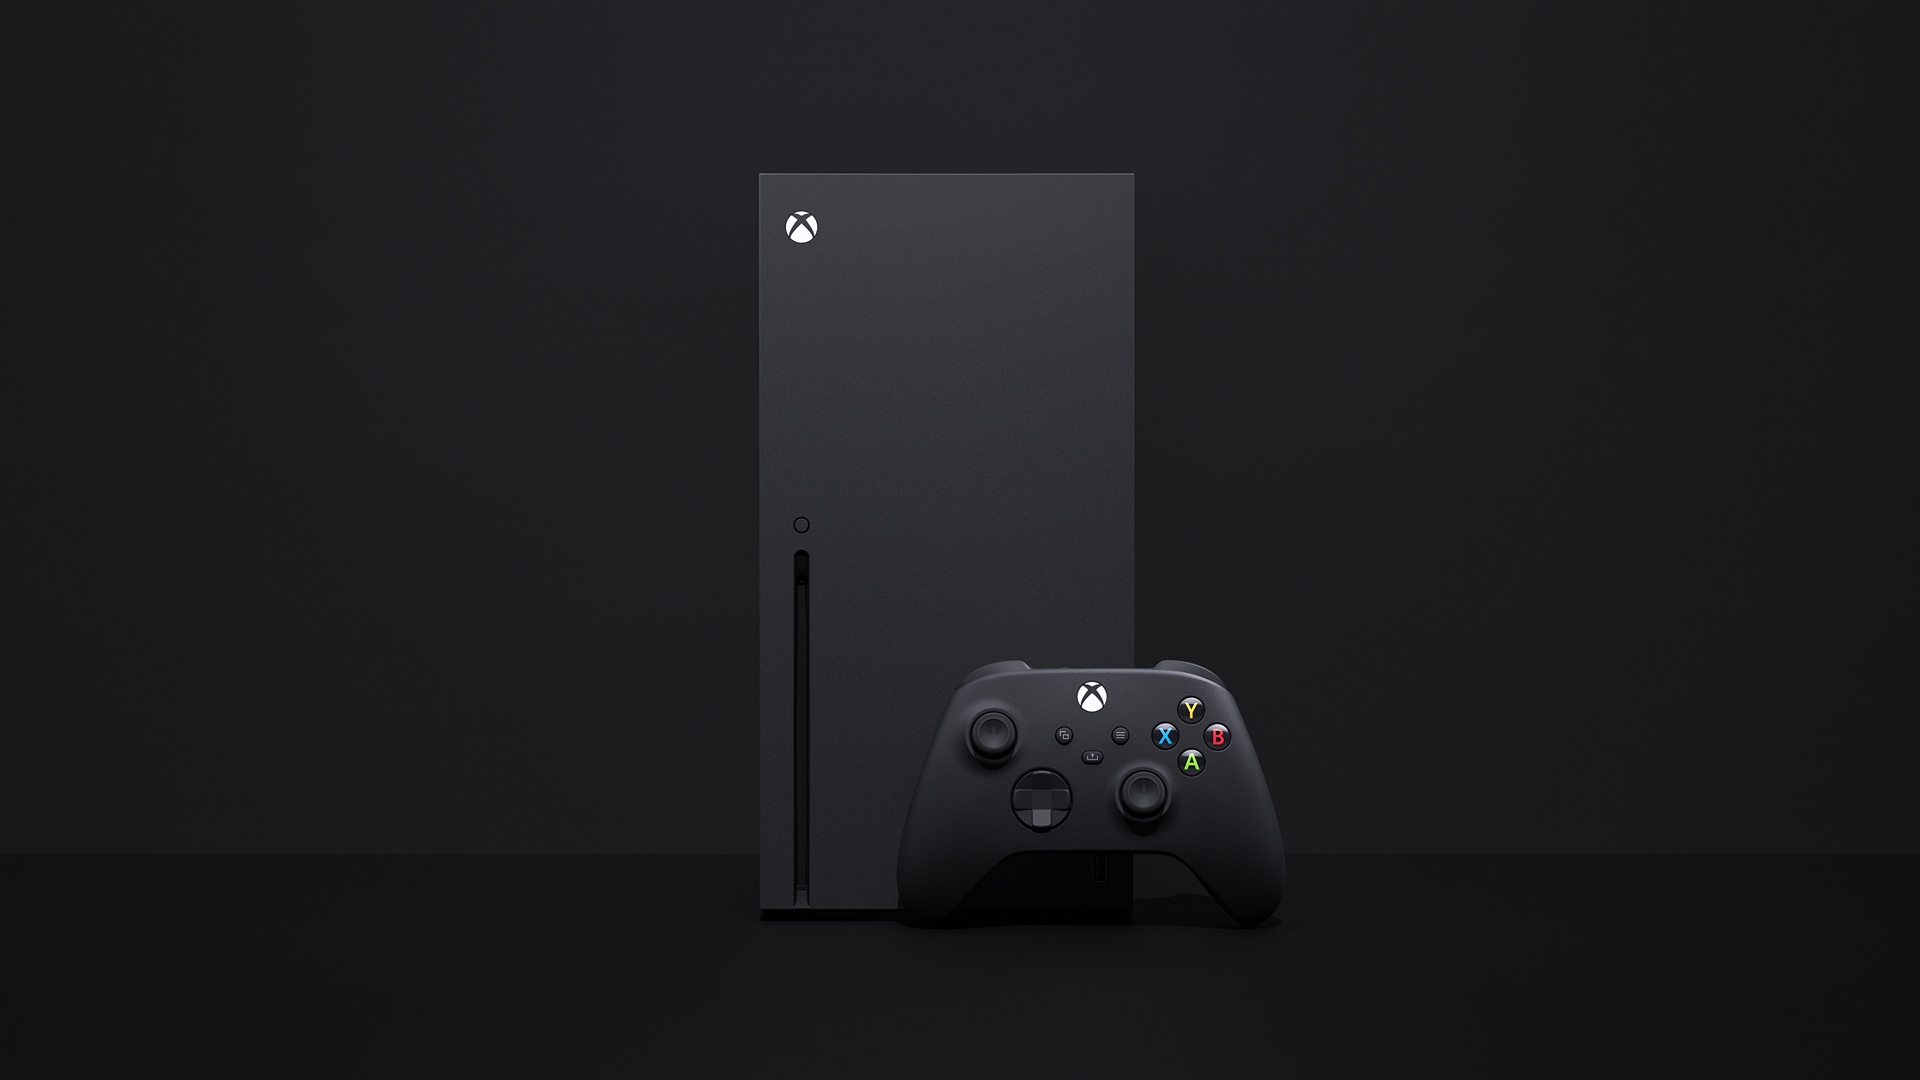 xbox series x release date